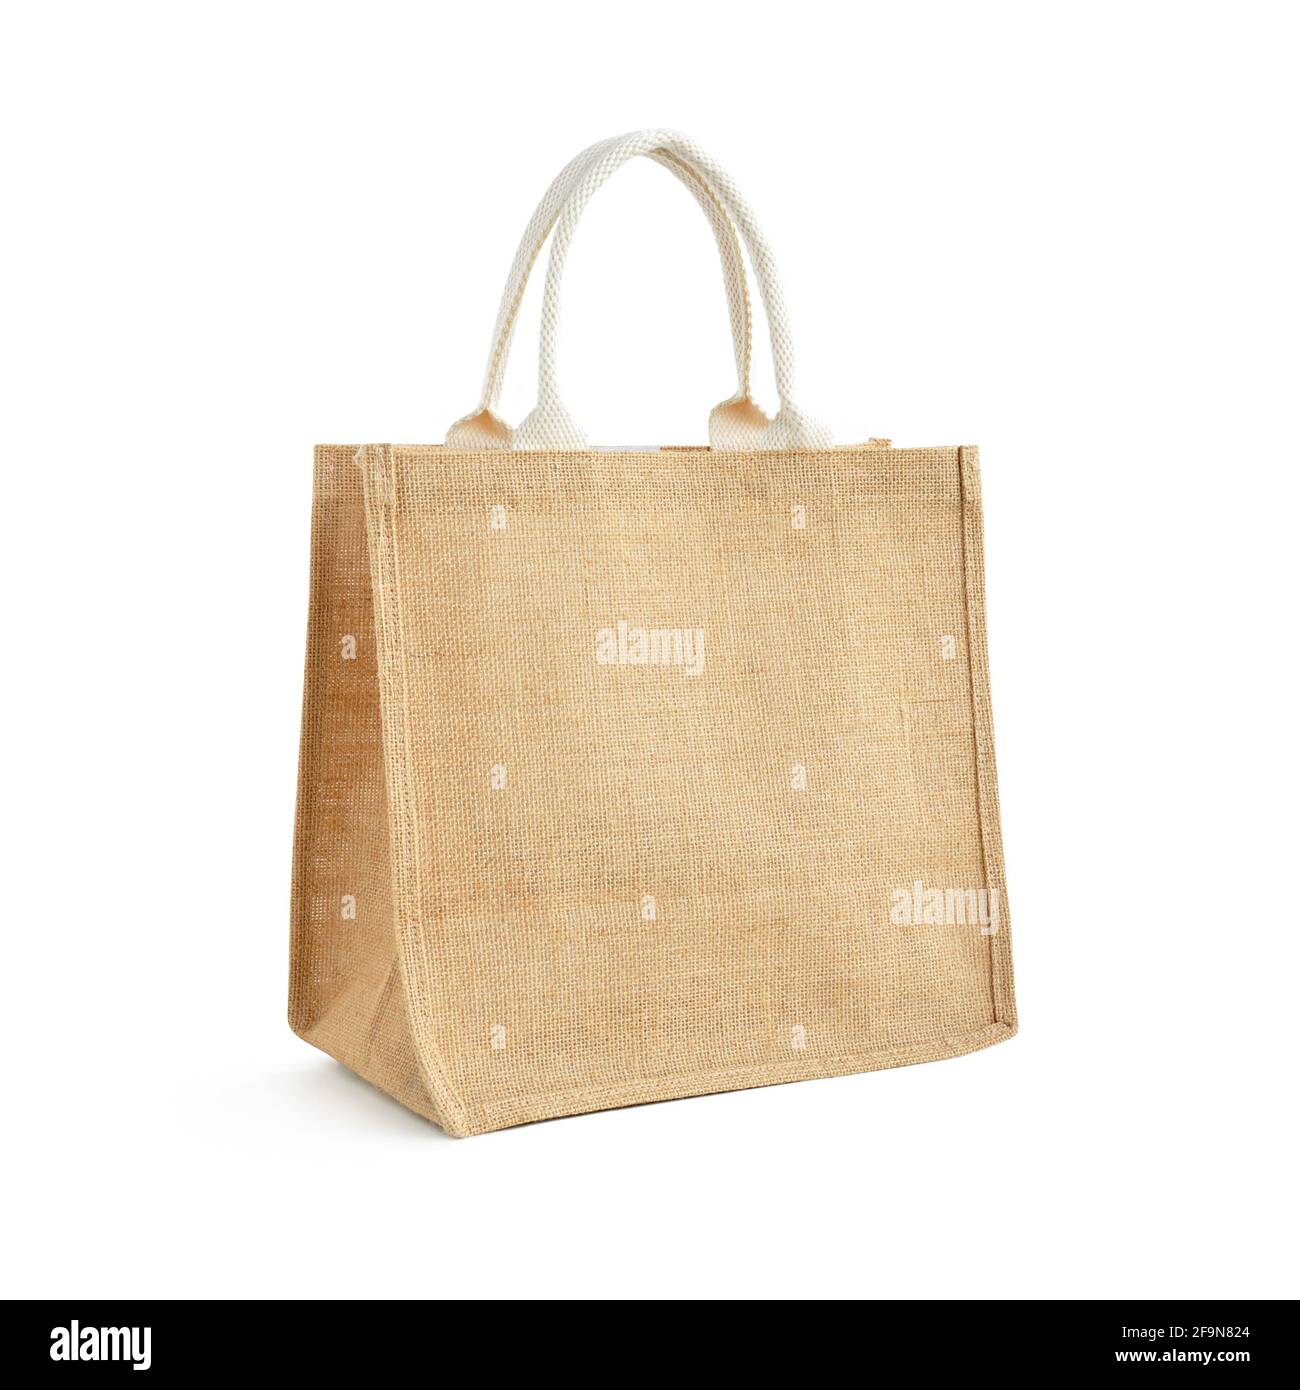 Hessian or jute bag - reusable brown shopping bag with loop handles - isolated Stock Photo